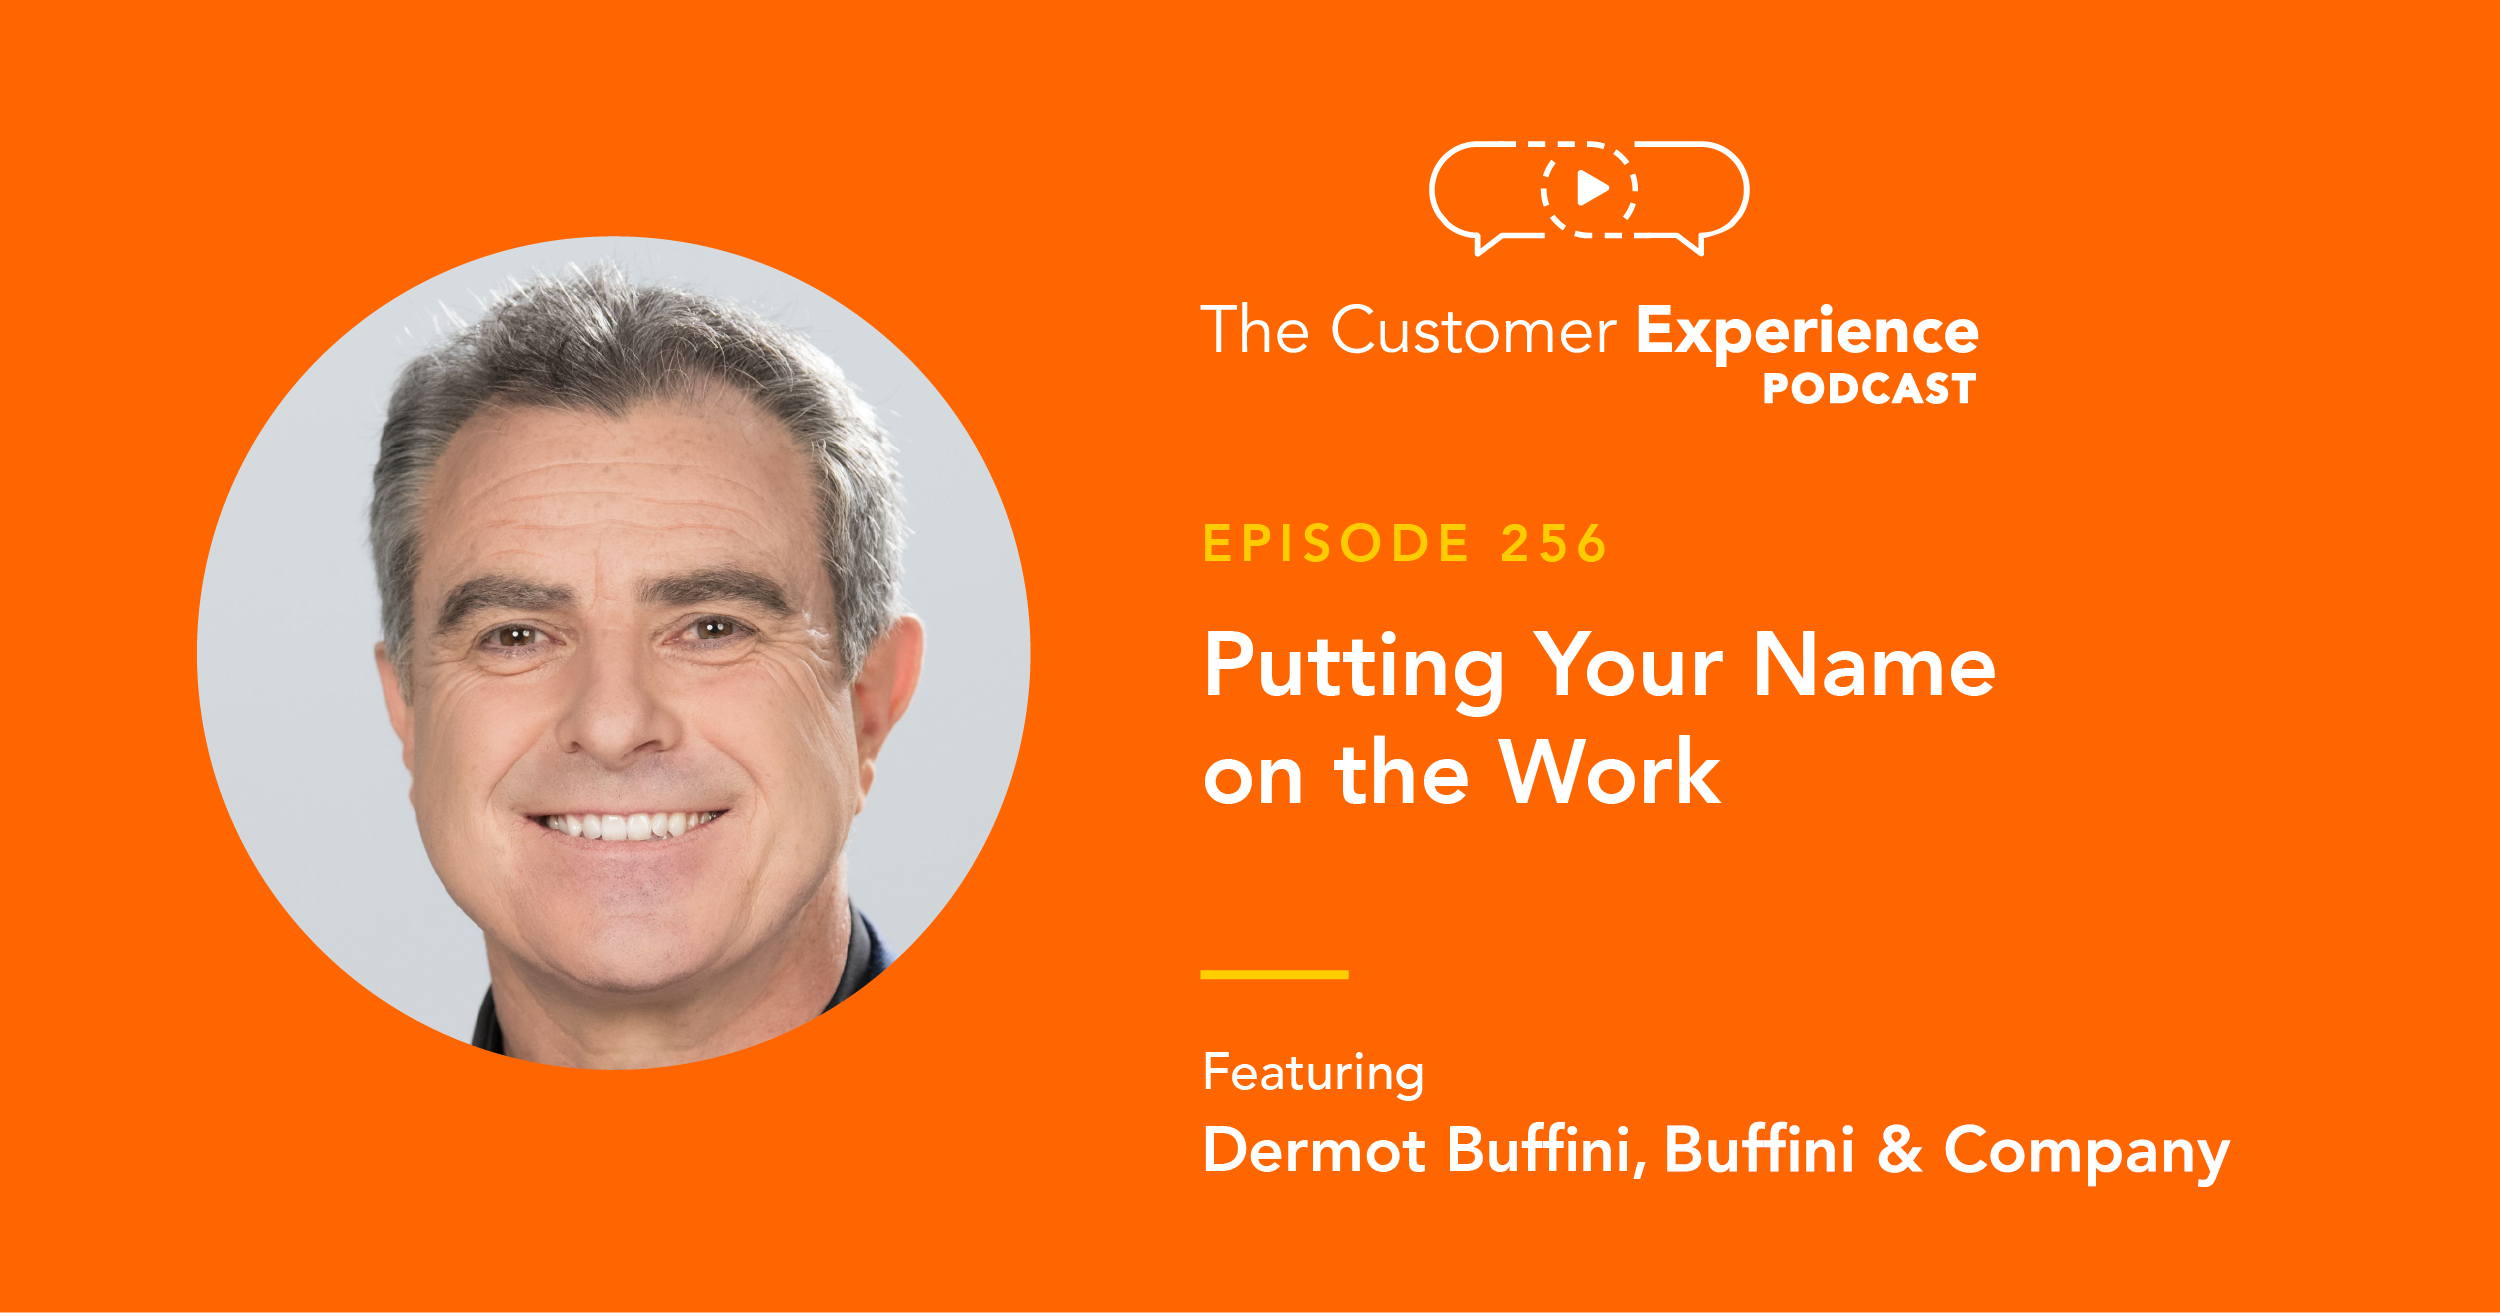 Dermot Buffini, Buffini and Company, Real Estate, The Customer Experience Podcast, customer service, pride in ownership, reputation, integrity